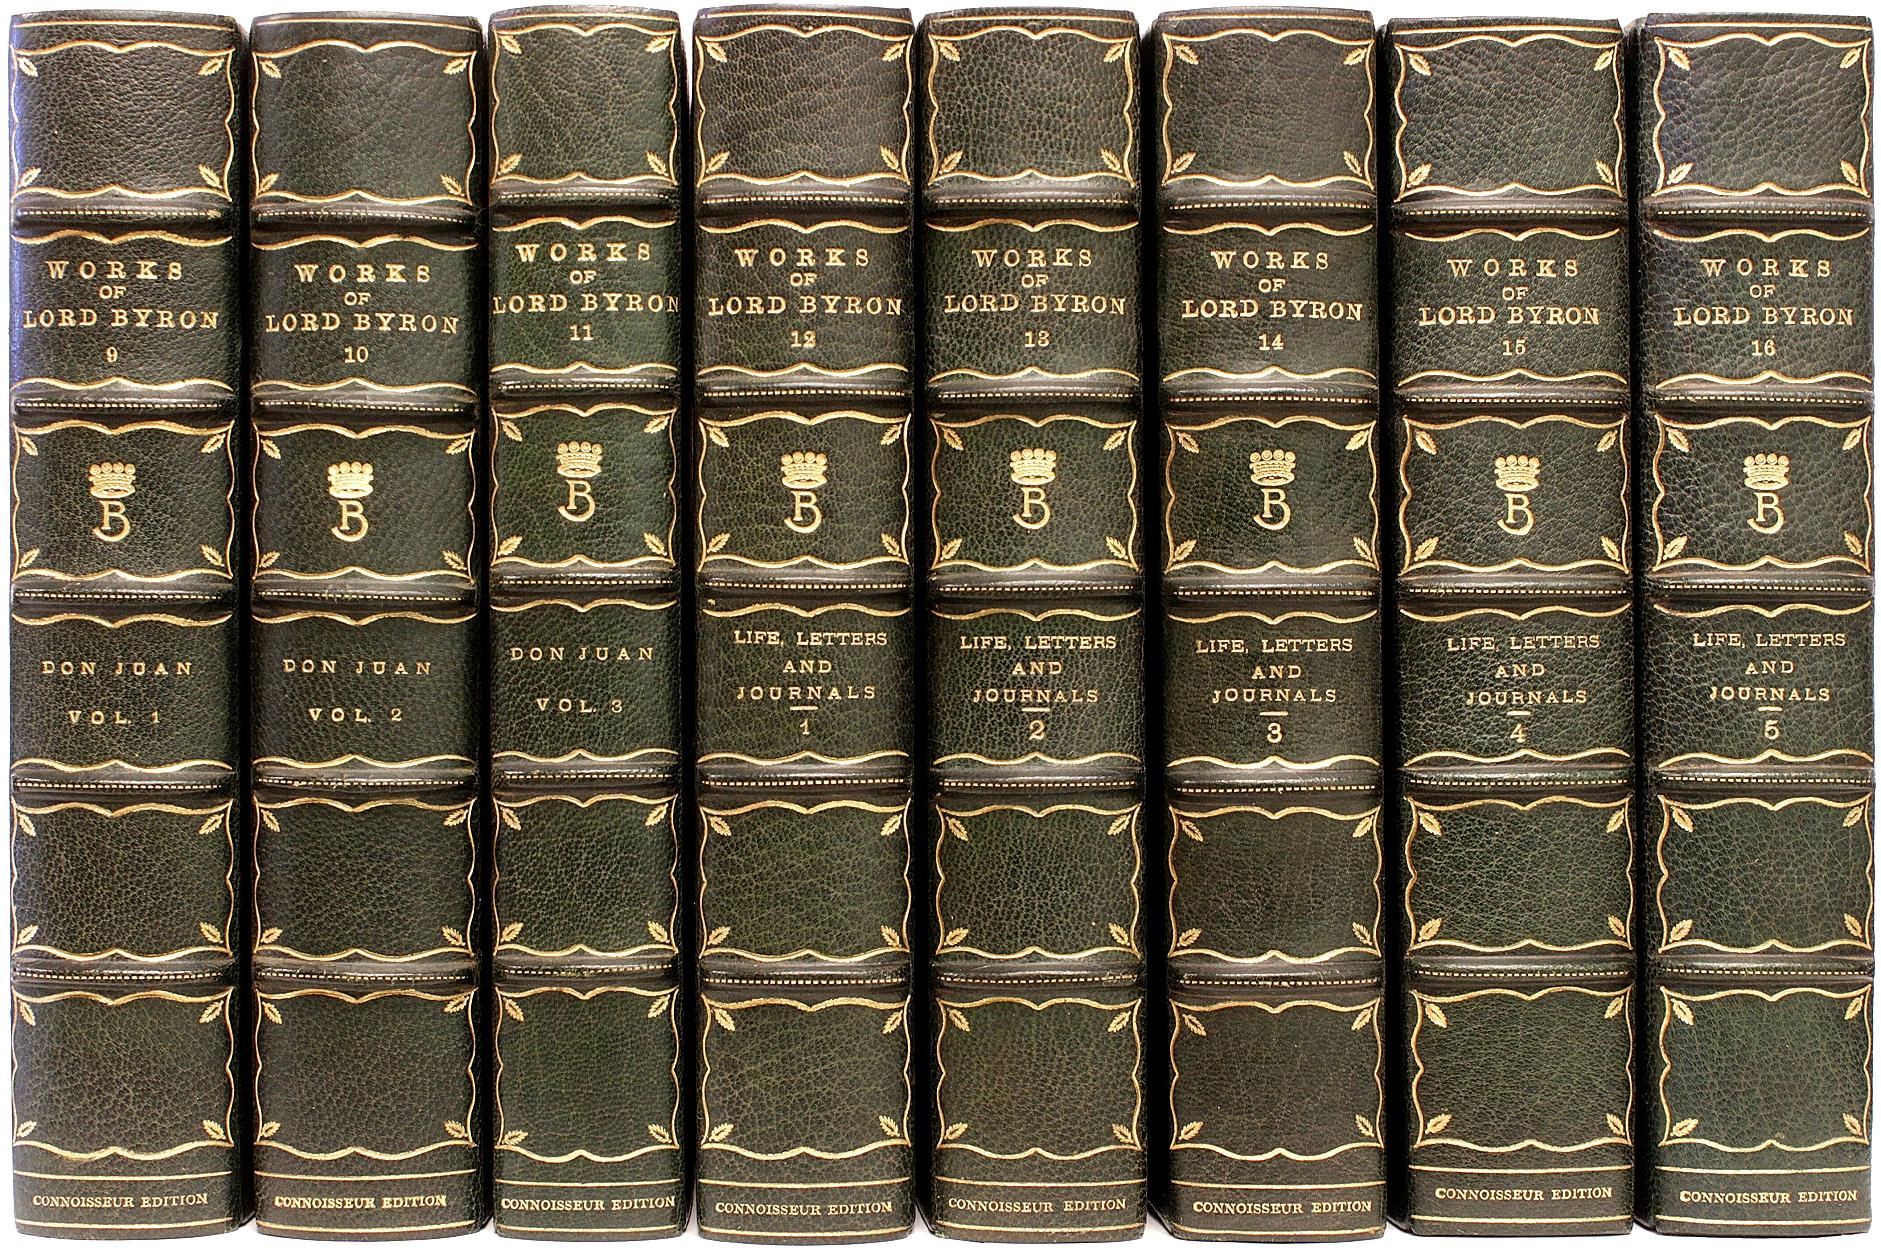 Author: BYRON, Lord (George Gordon). 

Title: The Works of Lord Byron Including His Letters and Journals.

Publisher: Boston: Francis A. Niccolls & Co., 1900.

Description: The connoisseur edition. 16 vols., 8-7/8